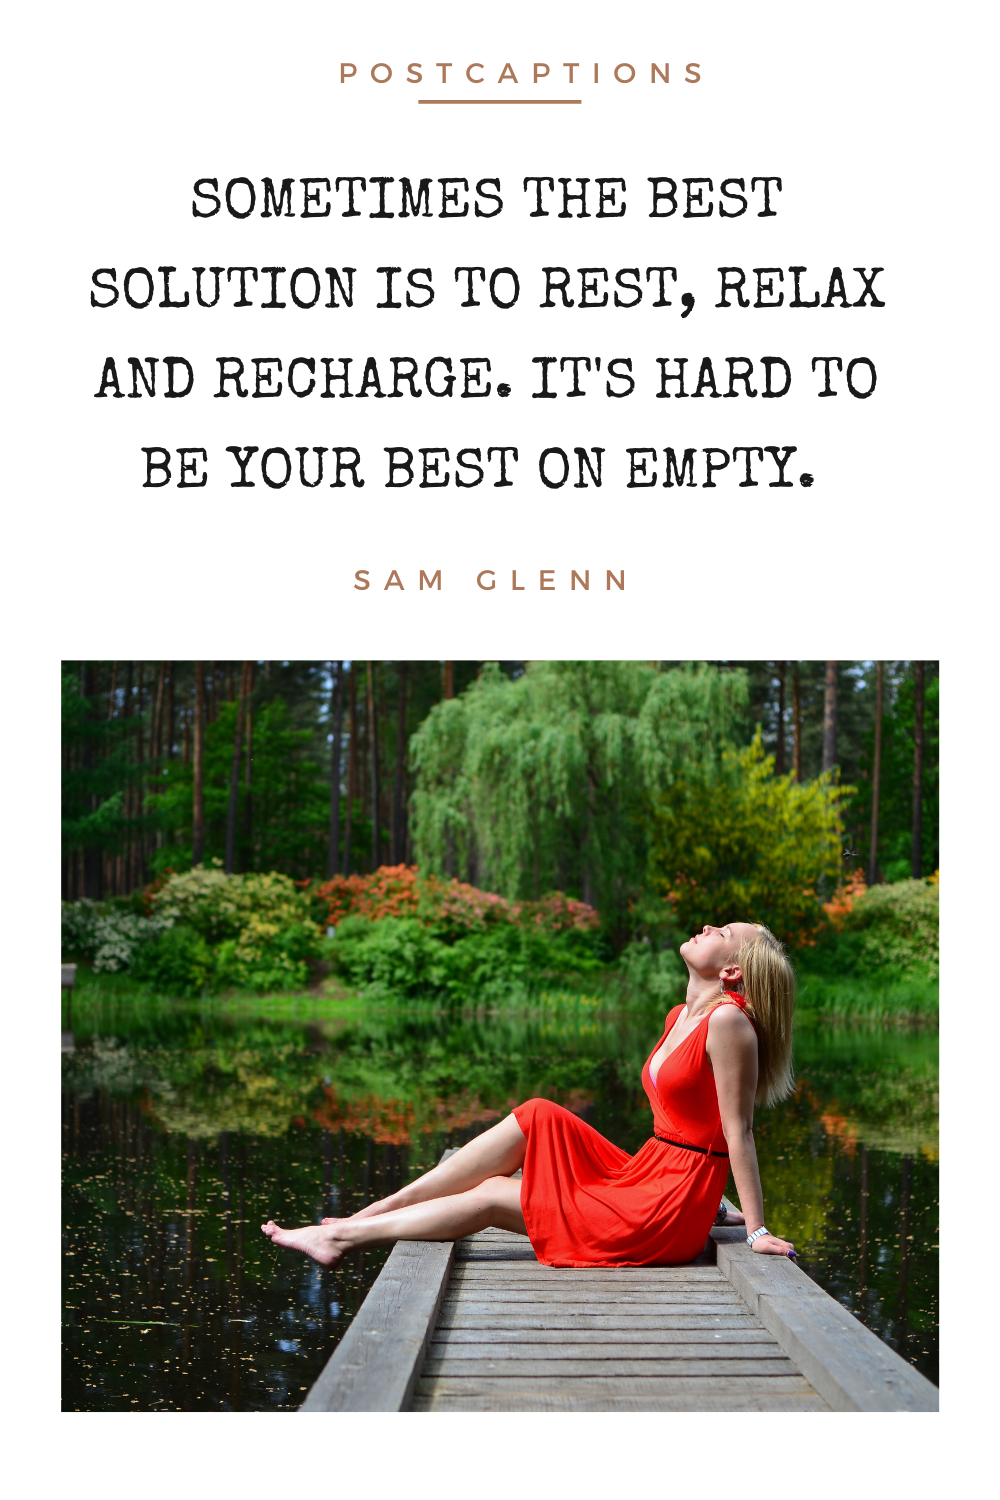 Relaxation quotes for Instagram